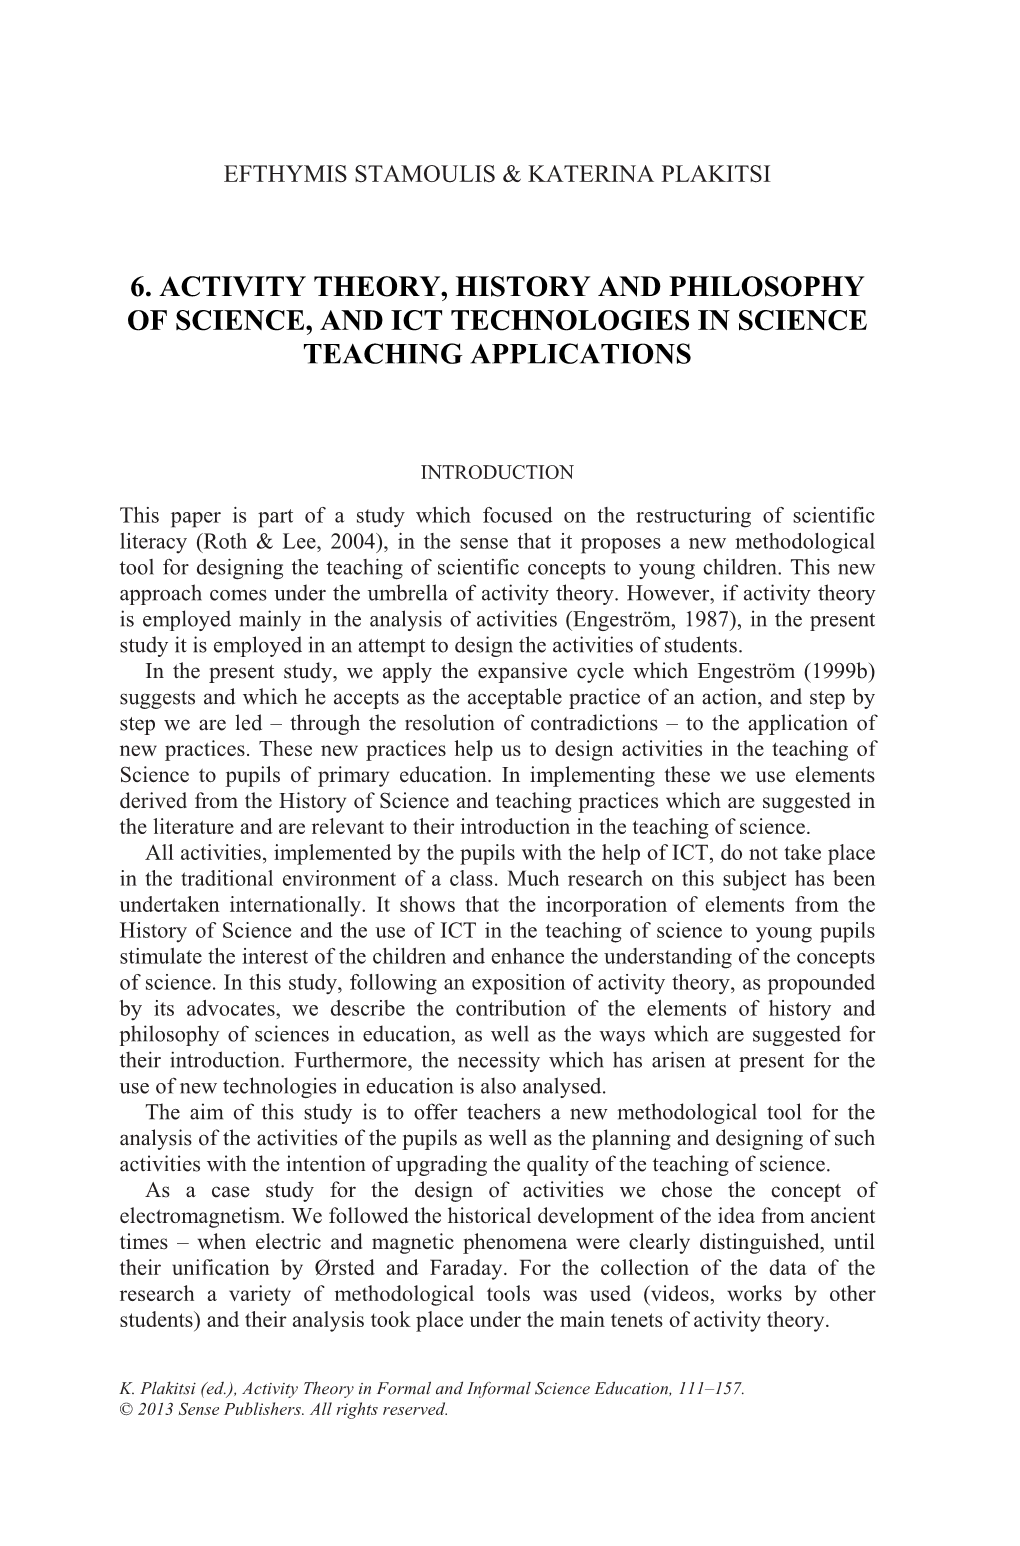 6. Activity Theory, History and Philosophy of Science, and Ict Technologies in Science Teaching Applications